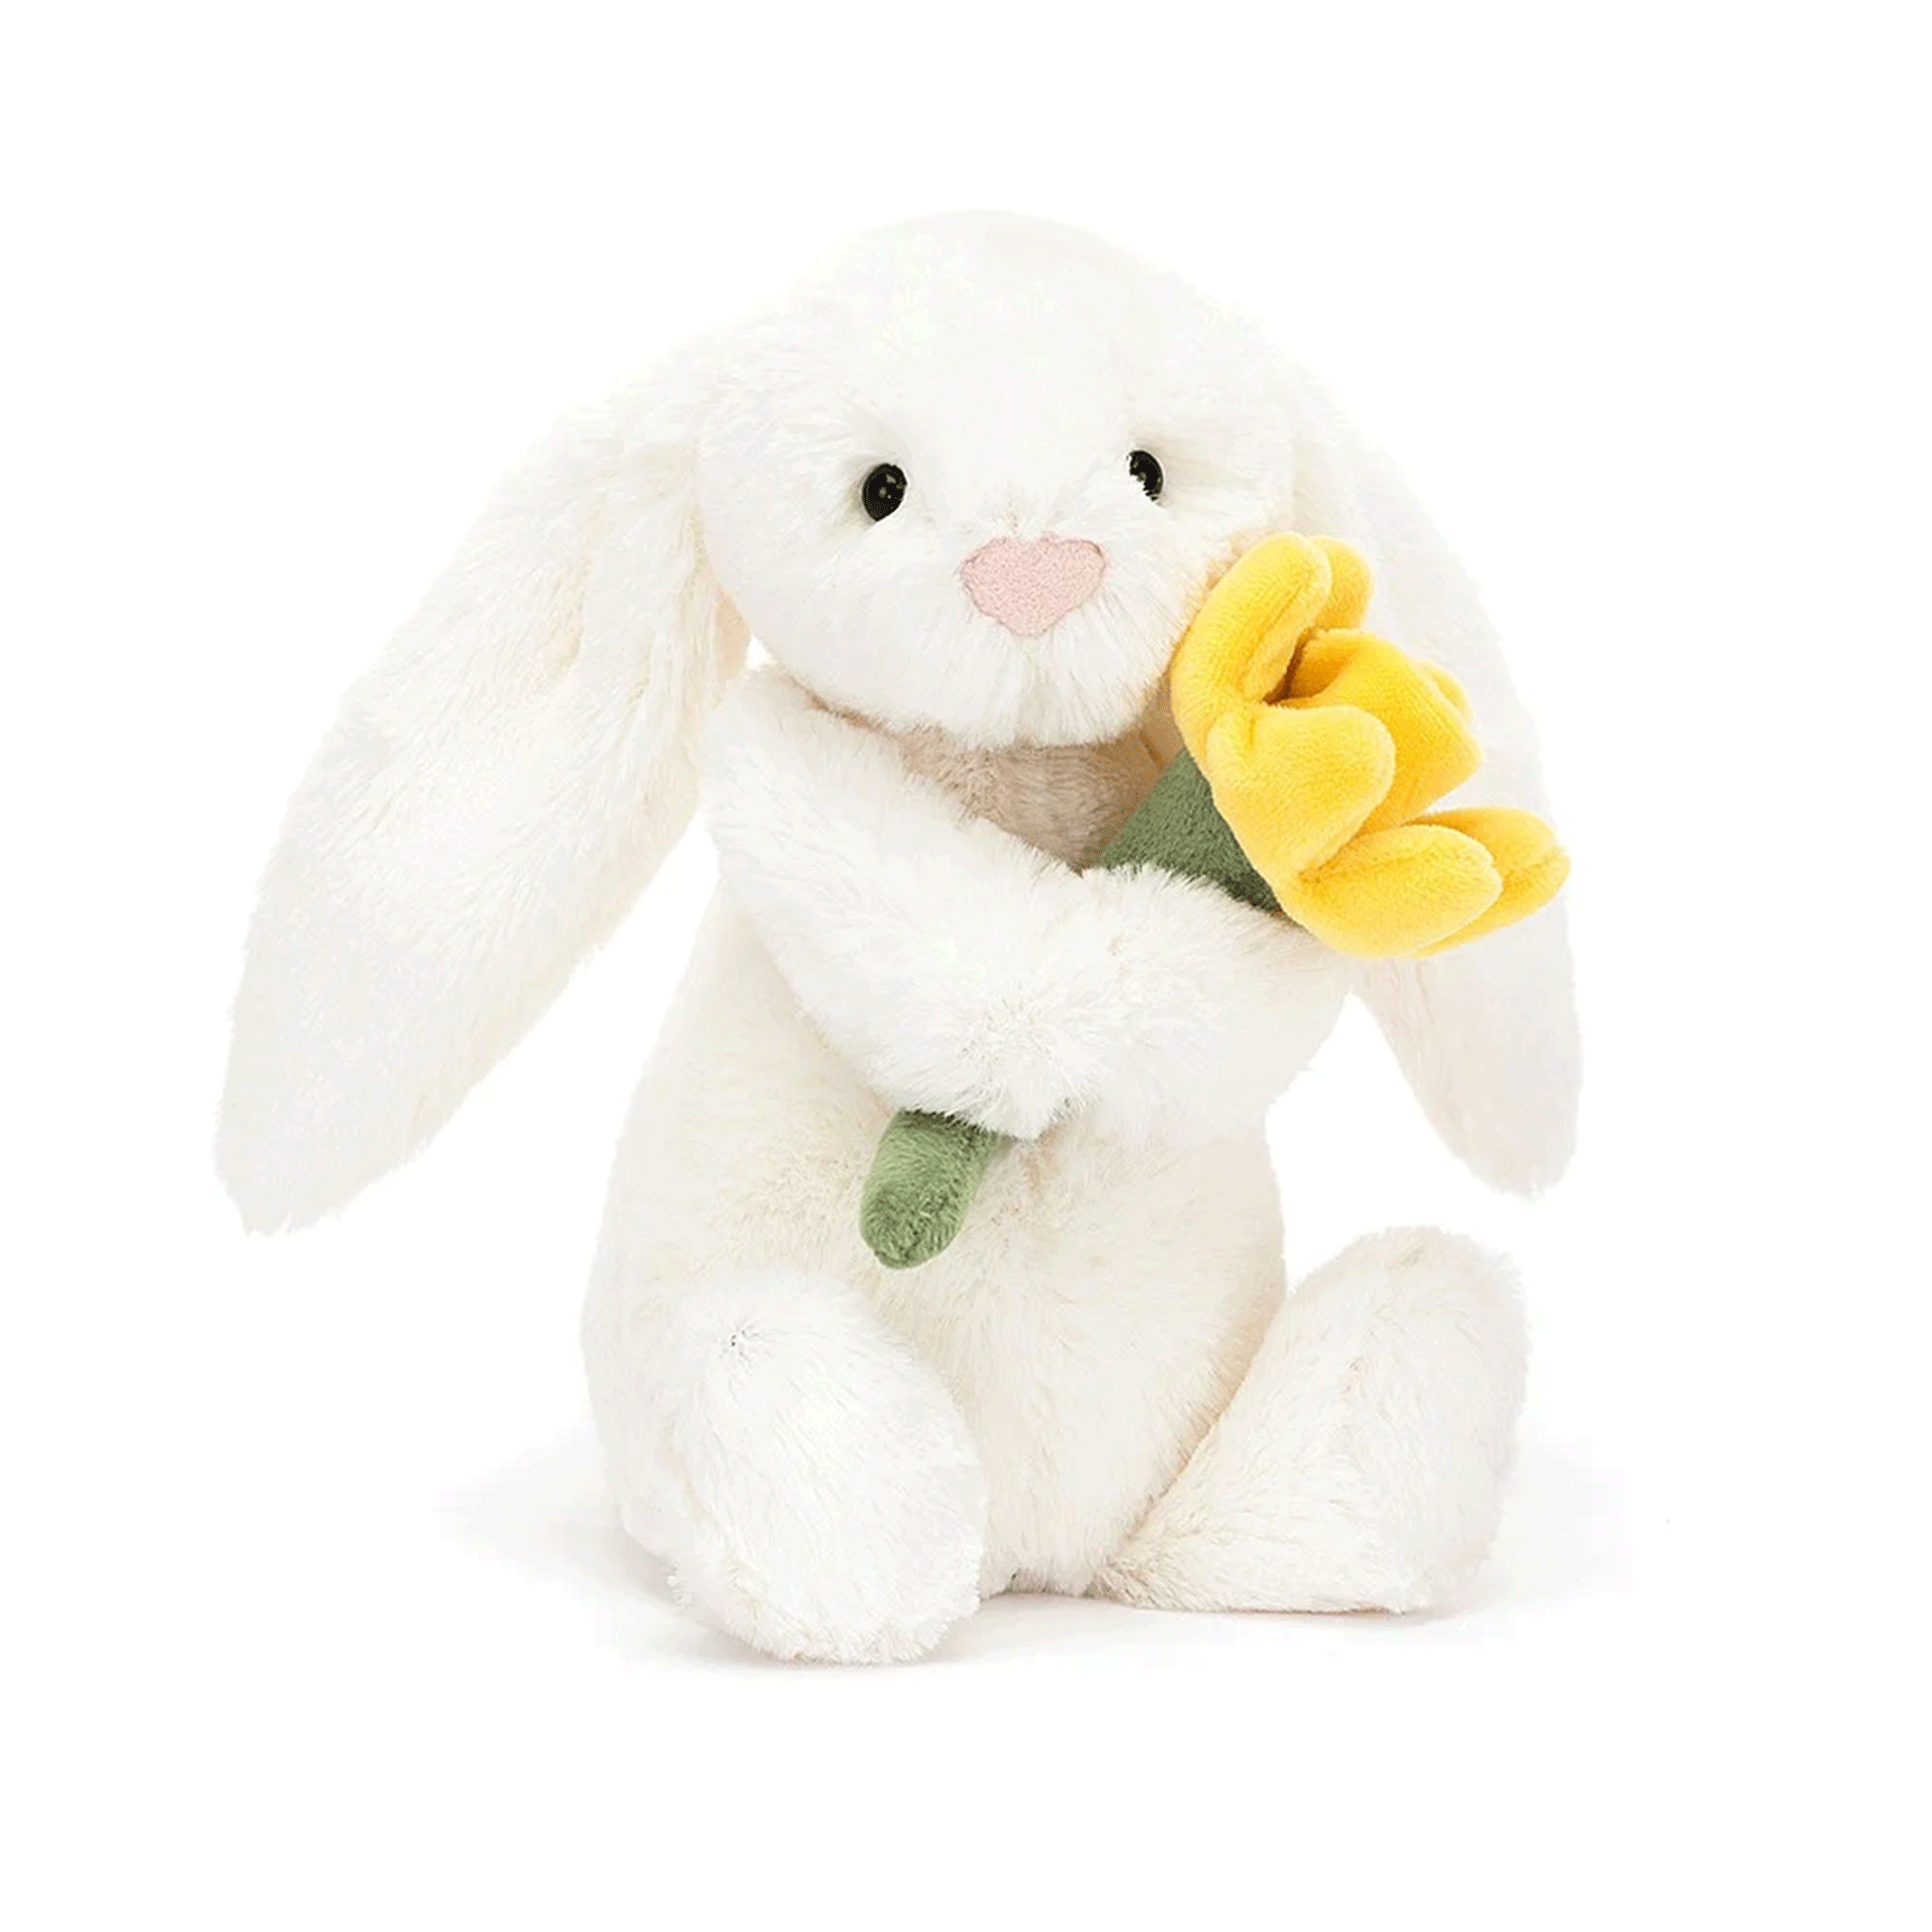 On a white background is a fuzzy white bunny stuffed animal toy with long floppy ears and holding a stuffed daffodil. 